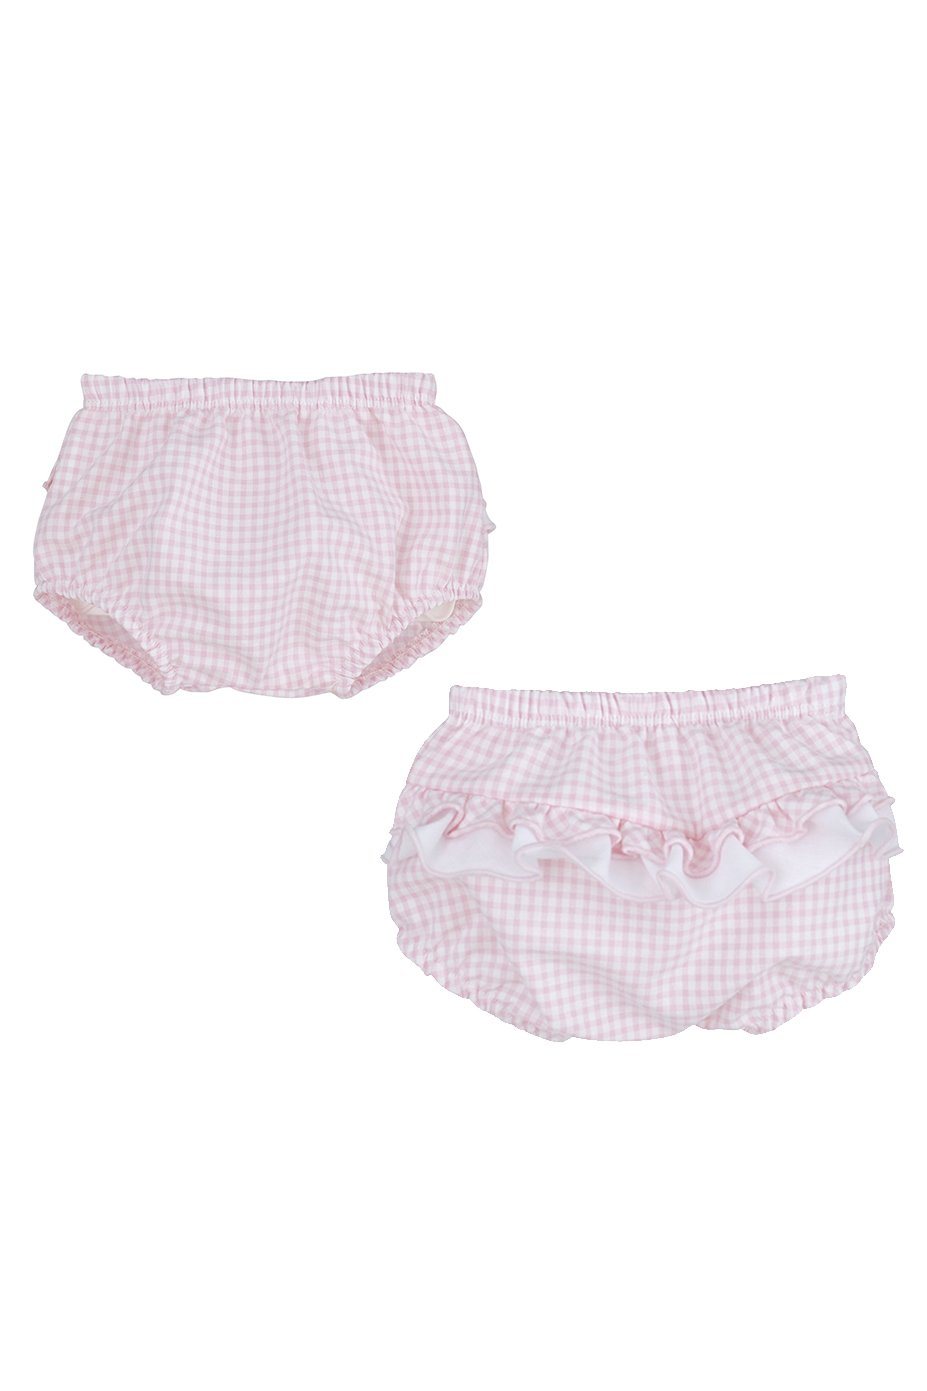 Calamaro "Dorothy" Pink Gingham Bloomers | iphoneandroidapplications